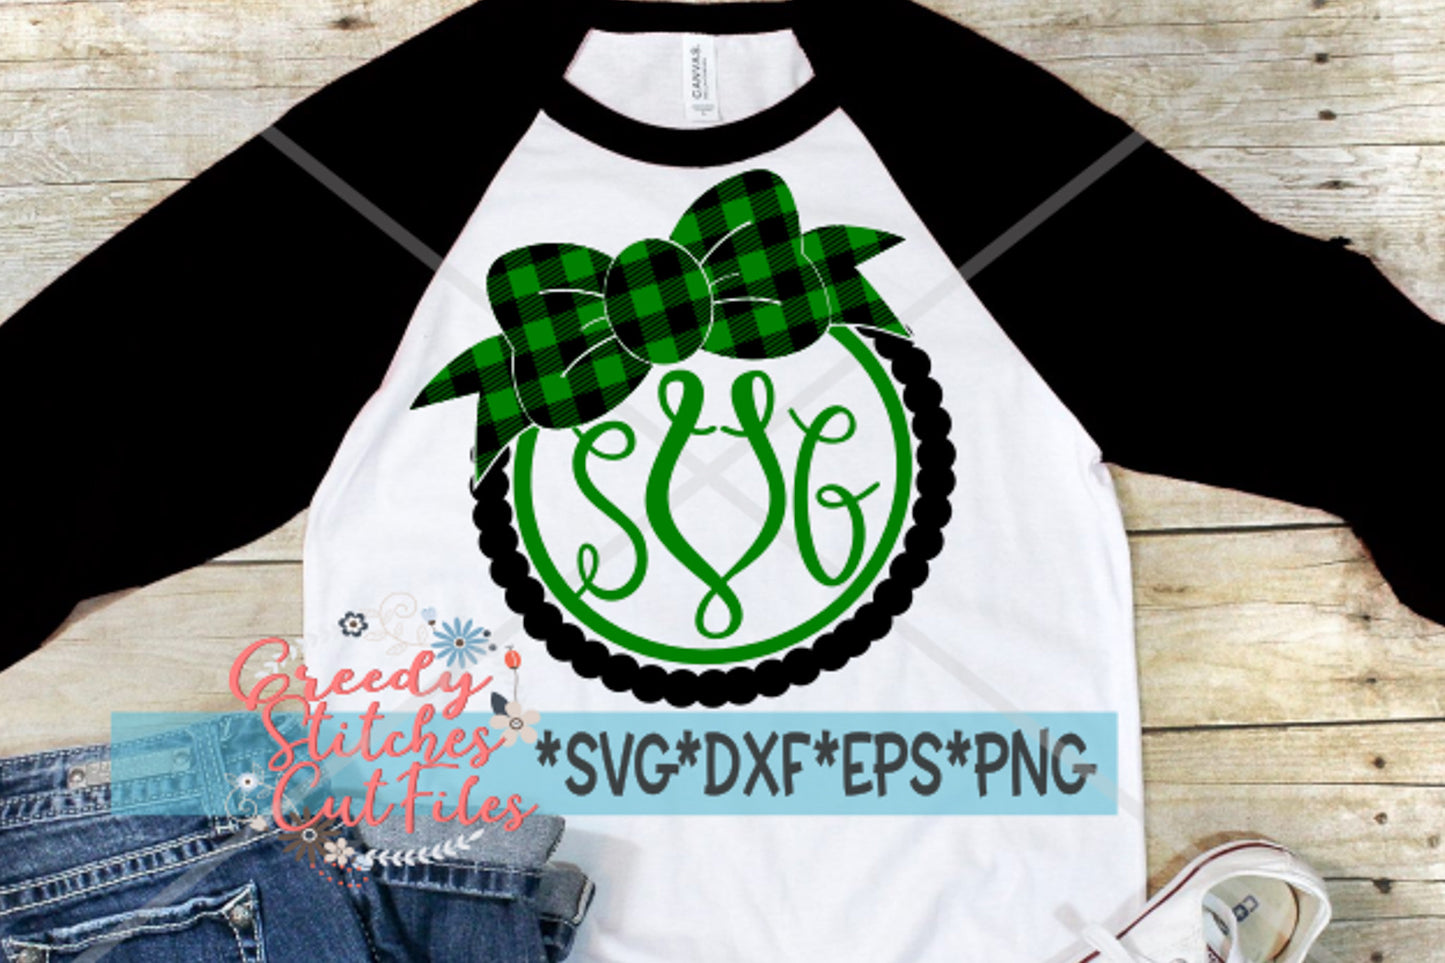 St. Patrick&#39;s Day SvG | Bows and Pearls Monogram Frame svg, dxf, eps, png. Monogram Frame SvG | Luck SvG | Instant Download Cut File